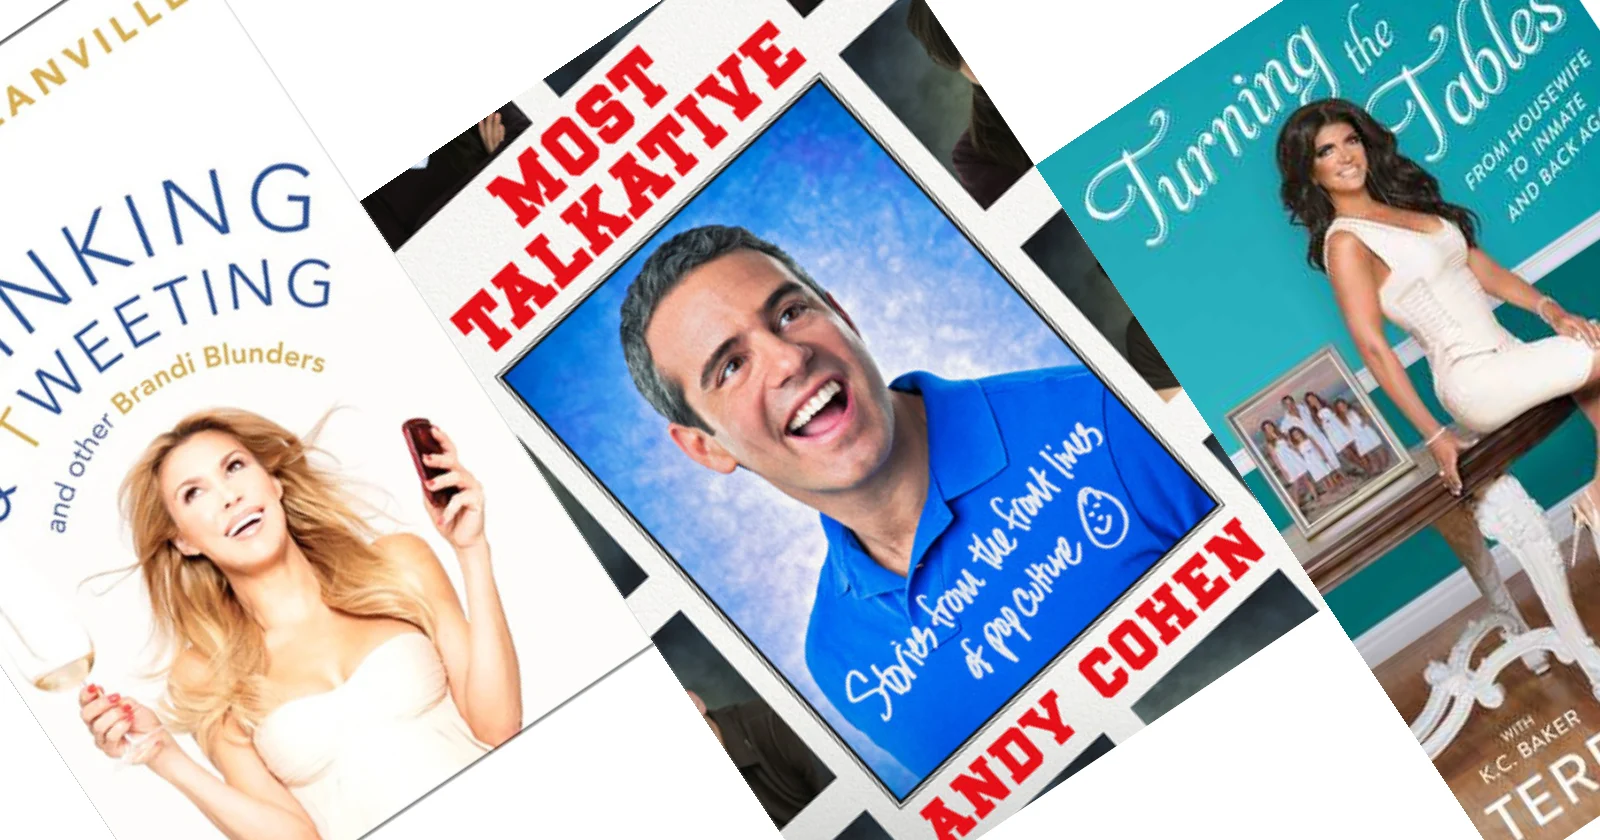 3 books by bravolebrities, with Andy Cohen's Most Talkative in the Center